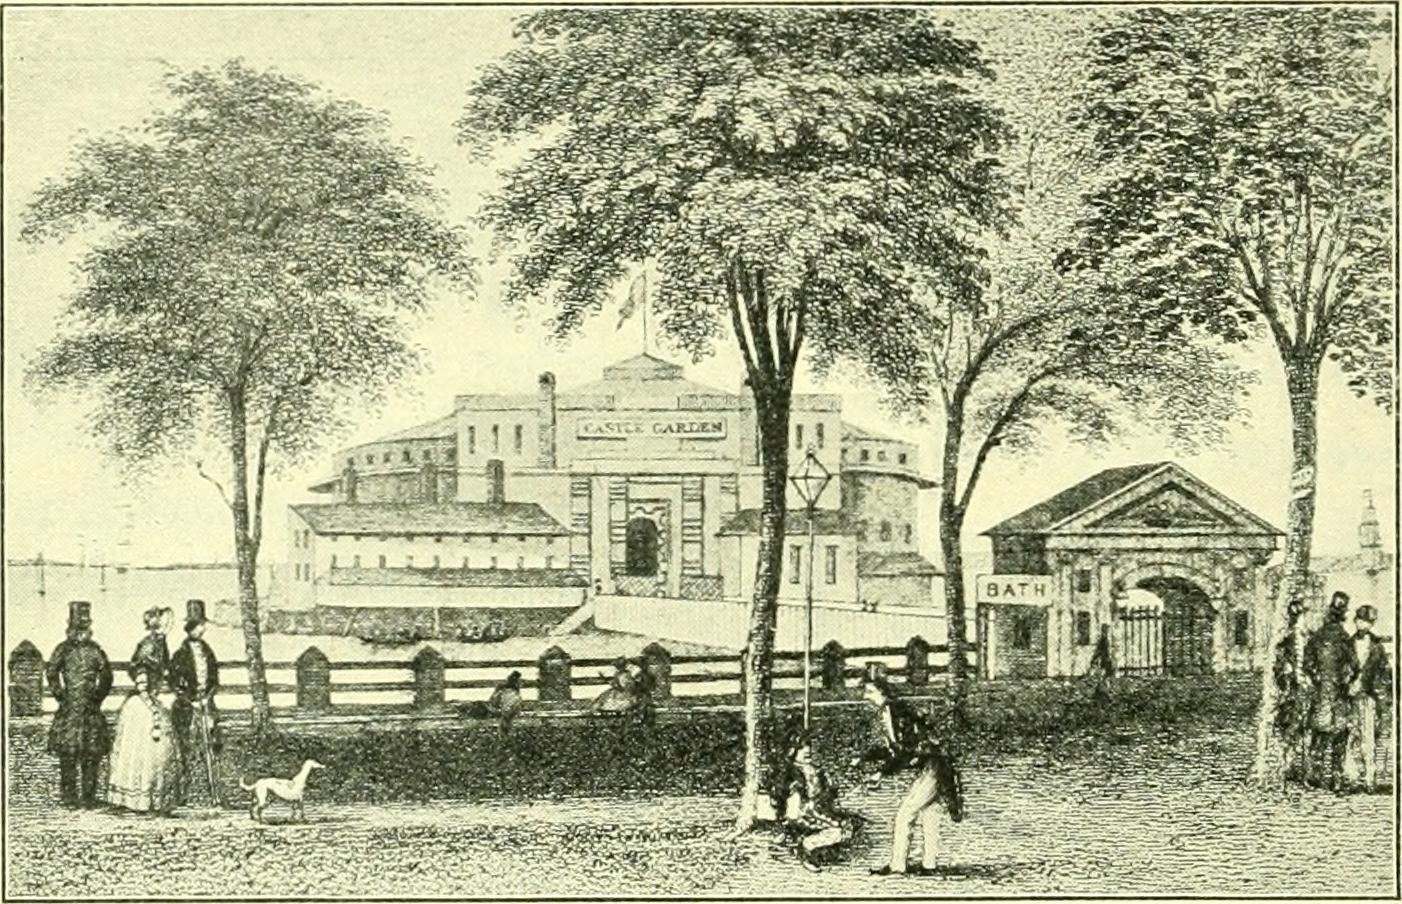 Image from 'A Home Geography of New York City (1905).